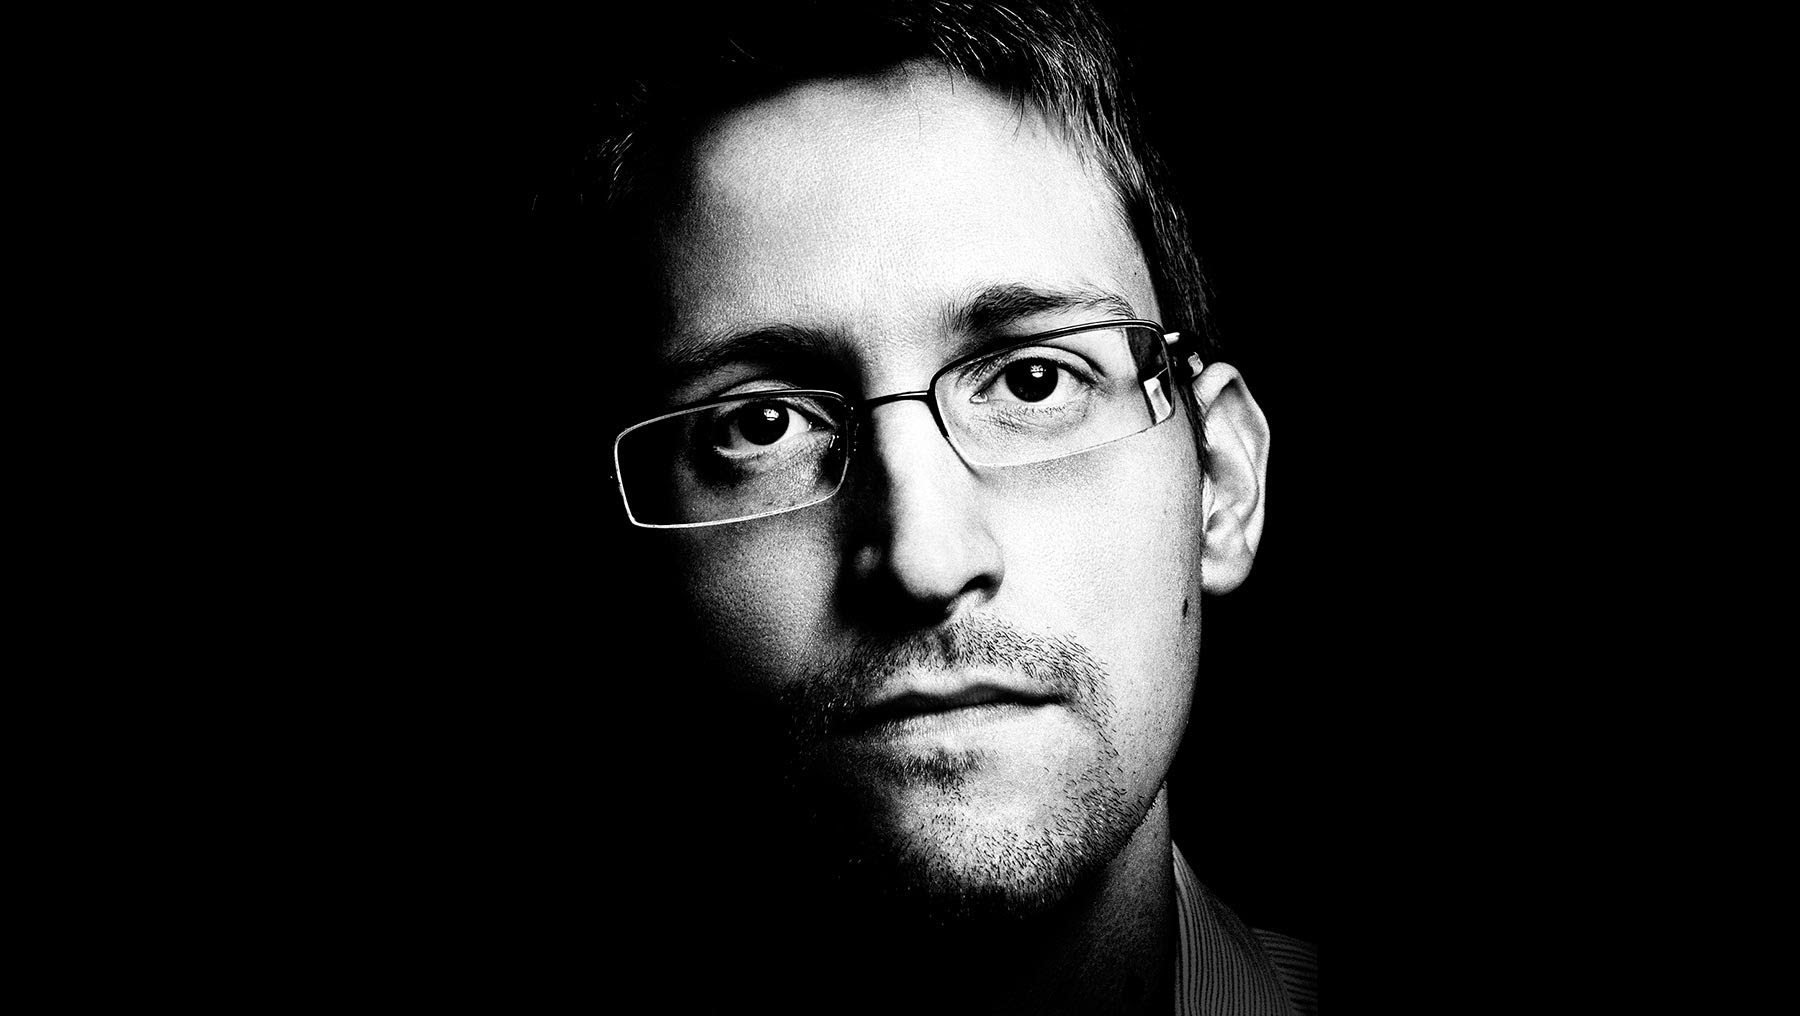 Anonymous – Chasing Edward Snowden Full Documentary